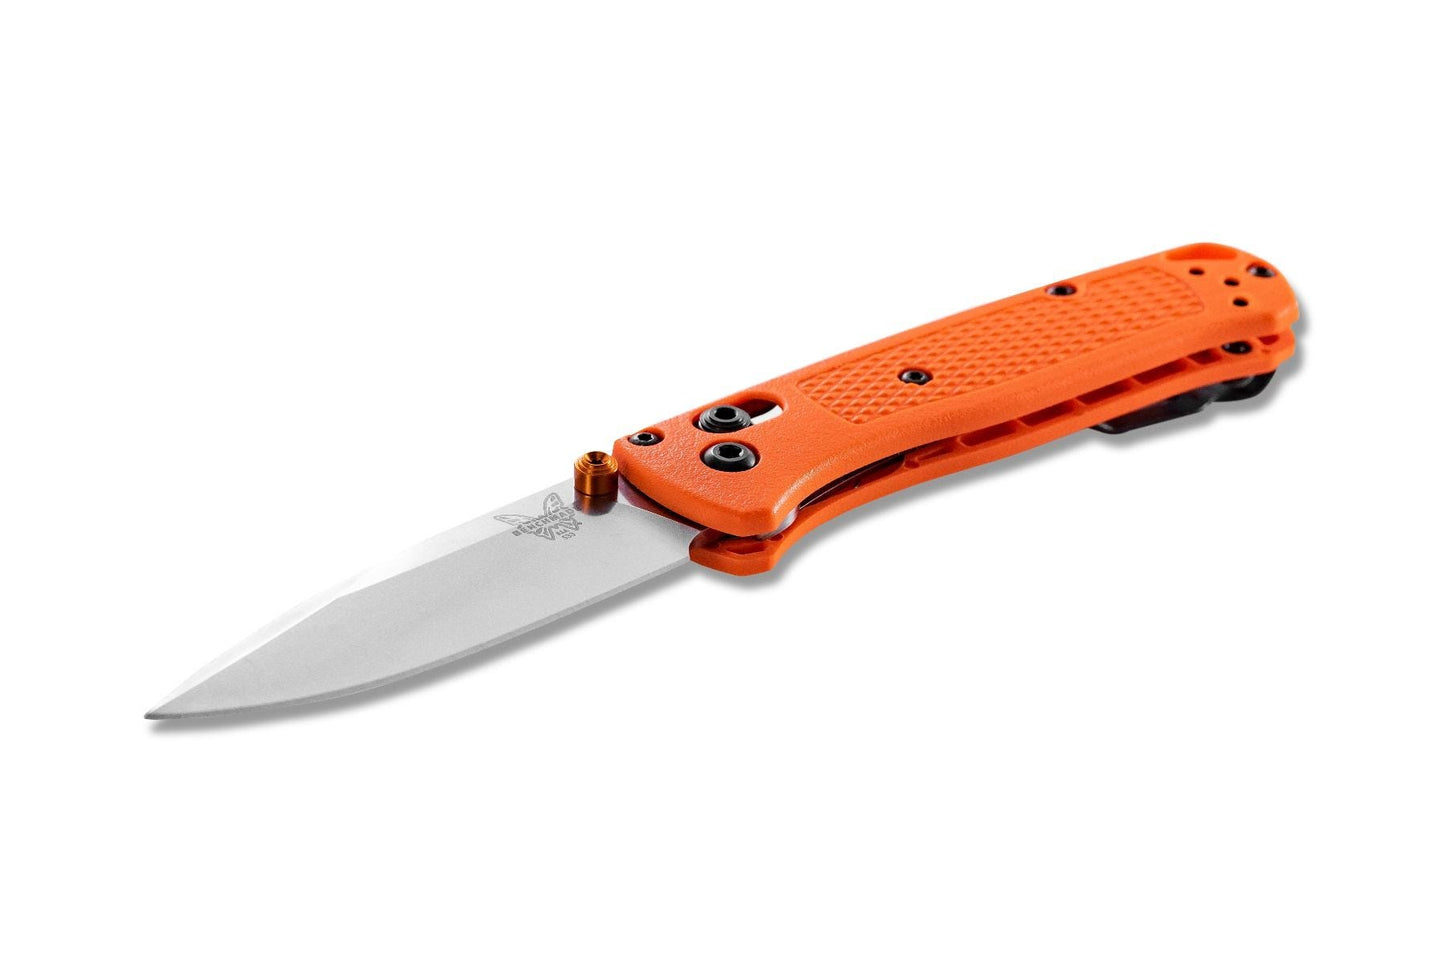 Benchmade 533 Mini Bugout 2.82" CPM-S30V Folding Knife with Orange Grivory Handle